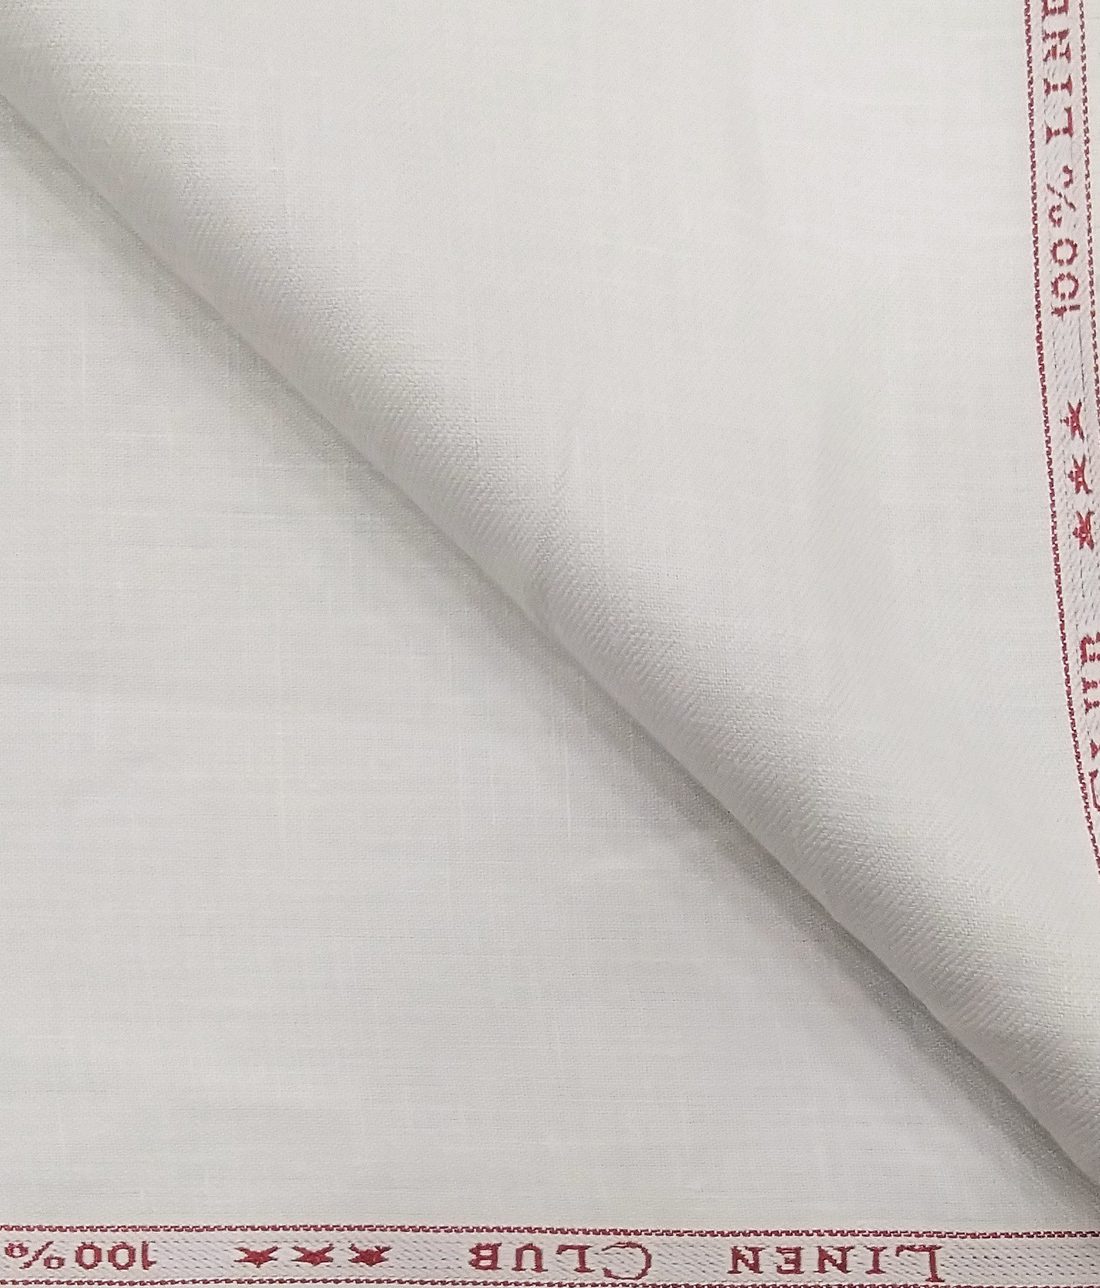 Linen Club Men's 100% Pure Linen Solid Unstitched Suiting Fabric (White